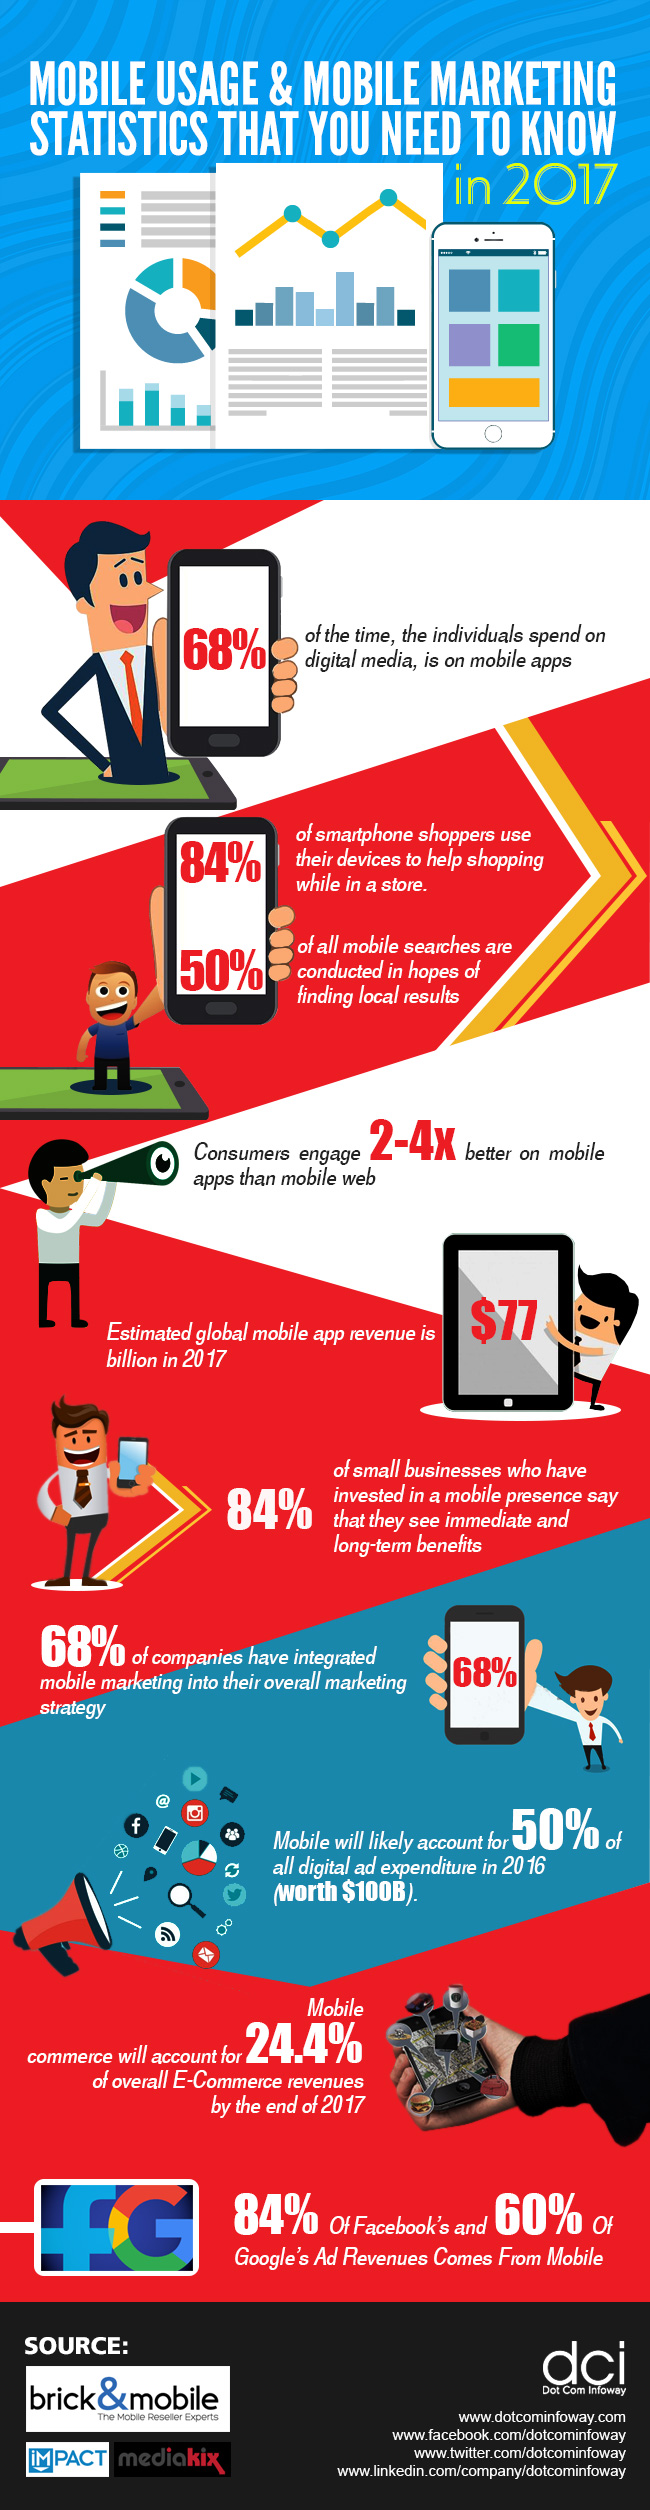 Mobile Usage & Mobile Marketing Statistics that You Need to Know [Infographic]